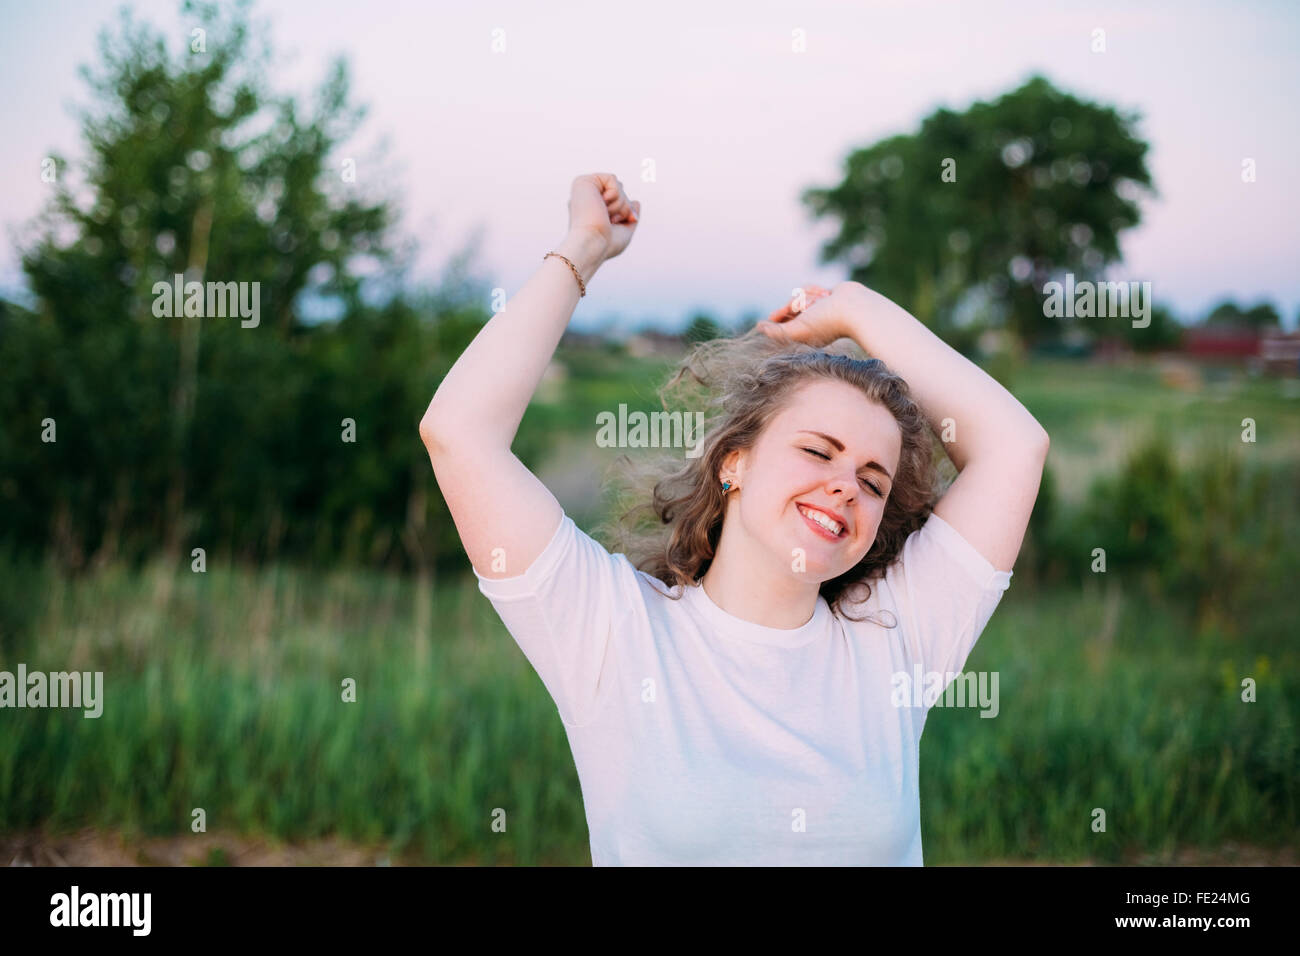 Pretty Caucasian Plus Size Young Woman In White Shirt Dancing on Summer green Field Meadow Background. Summer, Outdoor Portrait Stock Photo